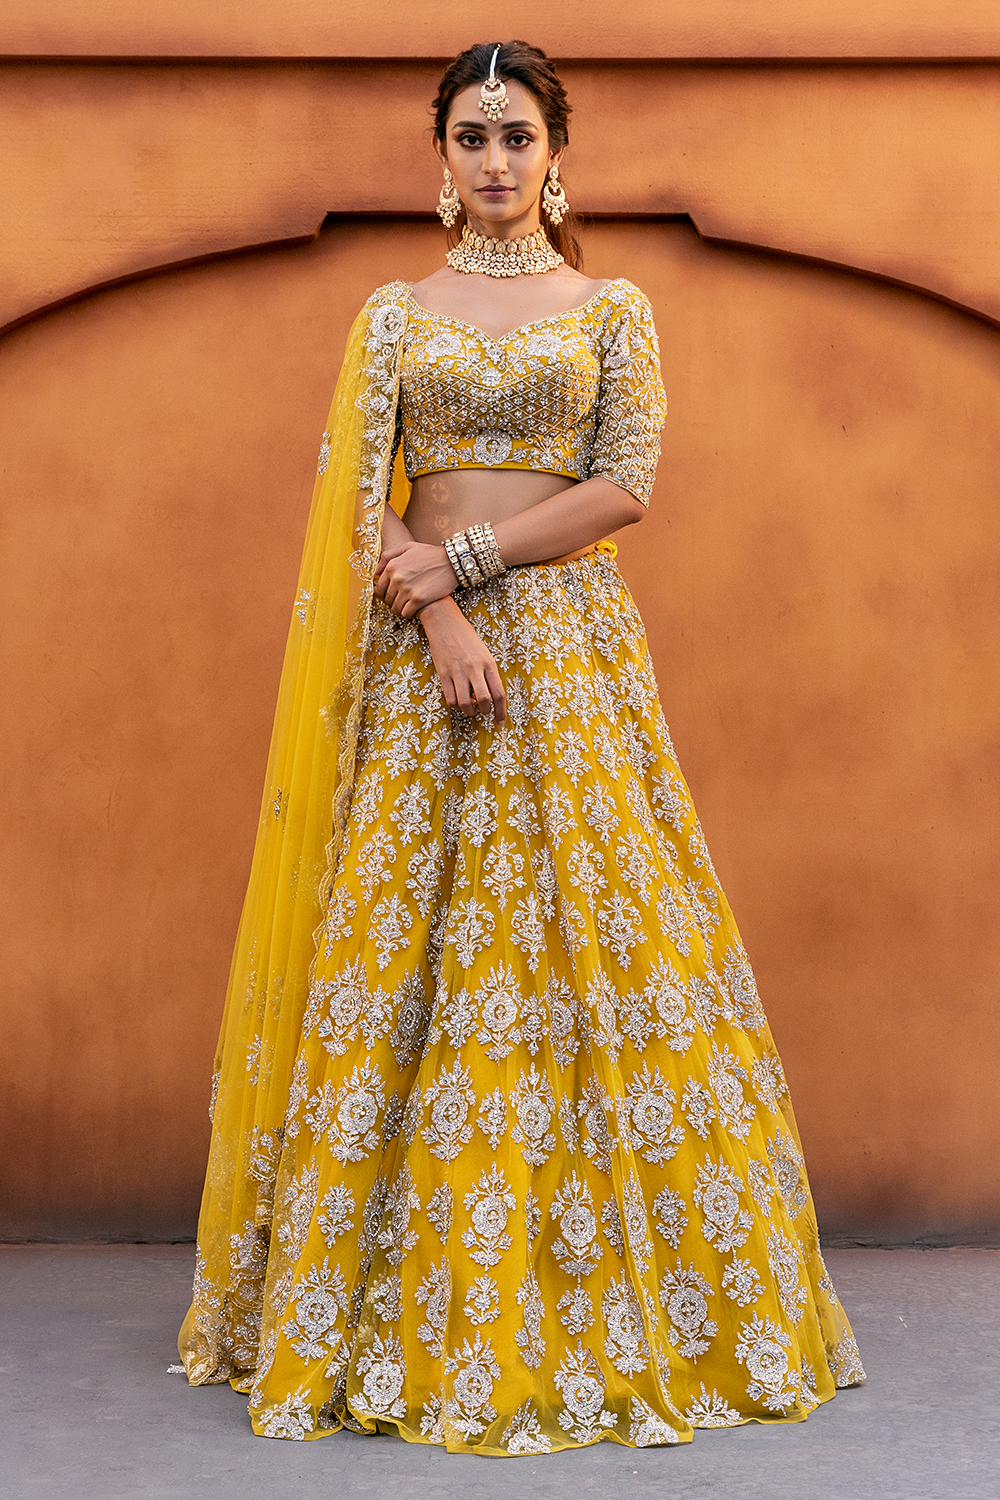 A Stunning Yellow Wedding Lehenga Choli With Contrast Blouse And Dupatta.  Decorated with sequins, and zari work all over. What are you… | Instagram